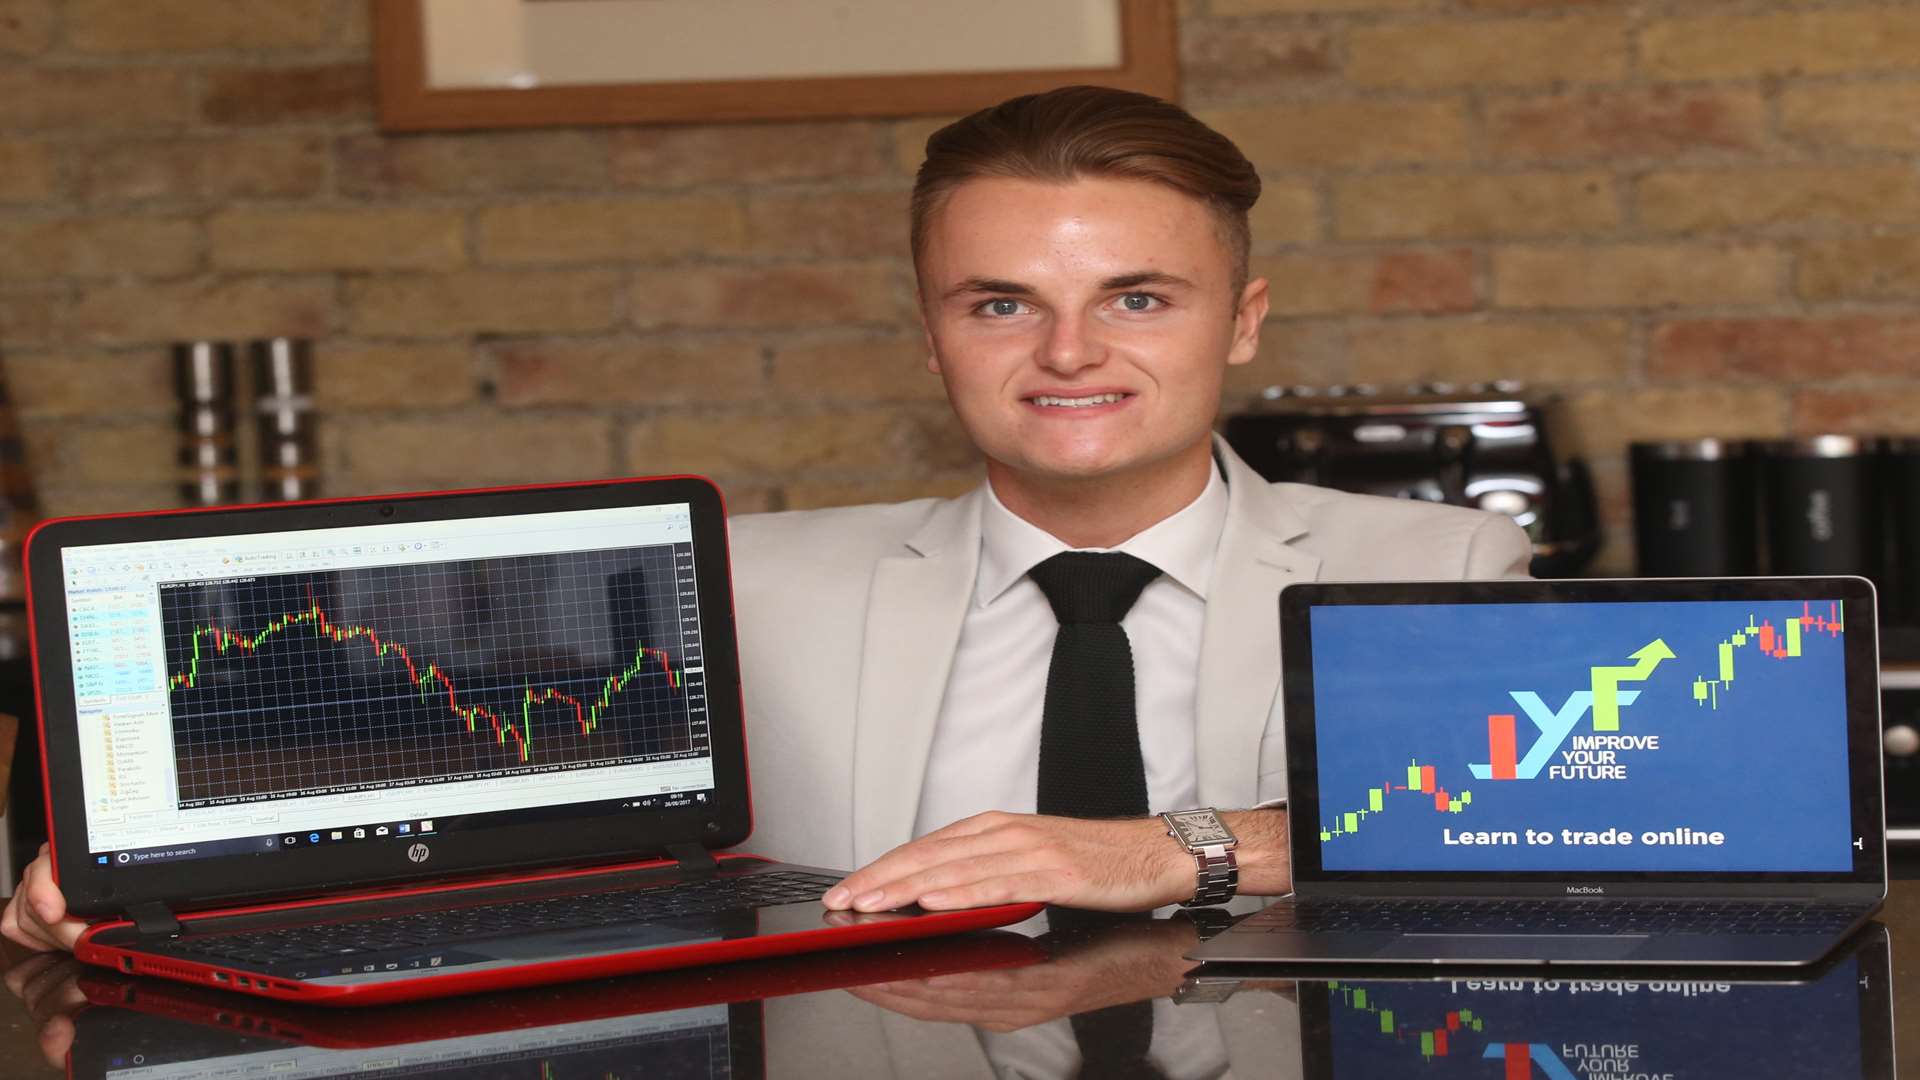 Jake Lee, 19, a university student who runs his own business, called "Improve Your Future," teaching people to trade on the Forex markets.